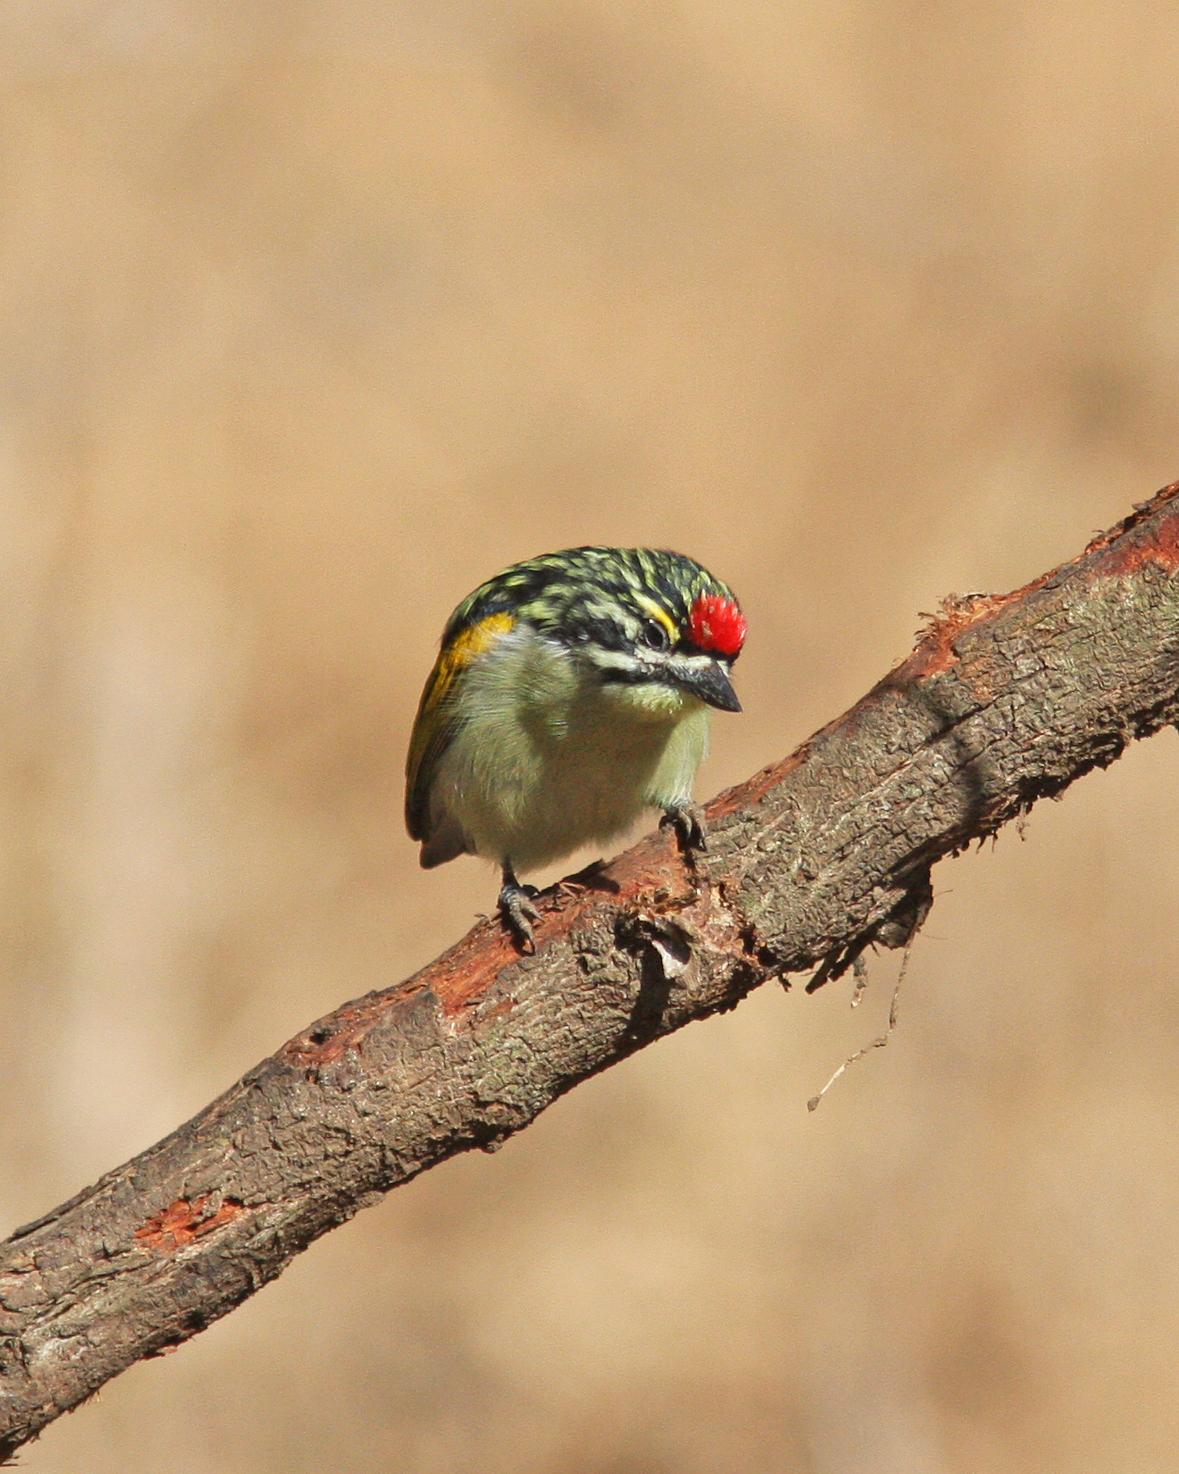 Red-fronted Tinkerbird Photo by Henk Baptist